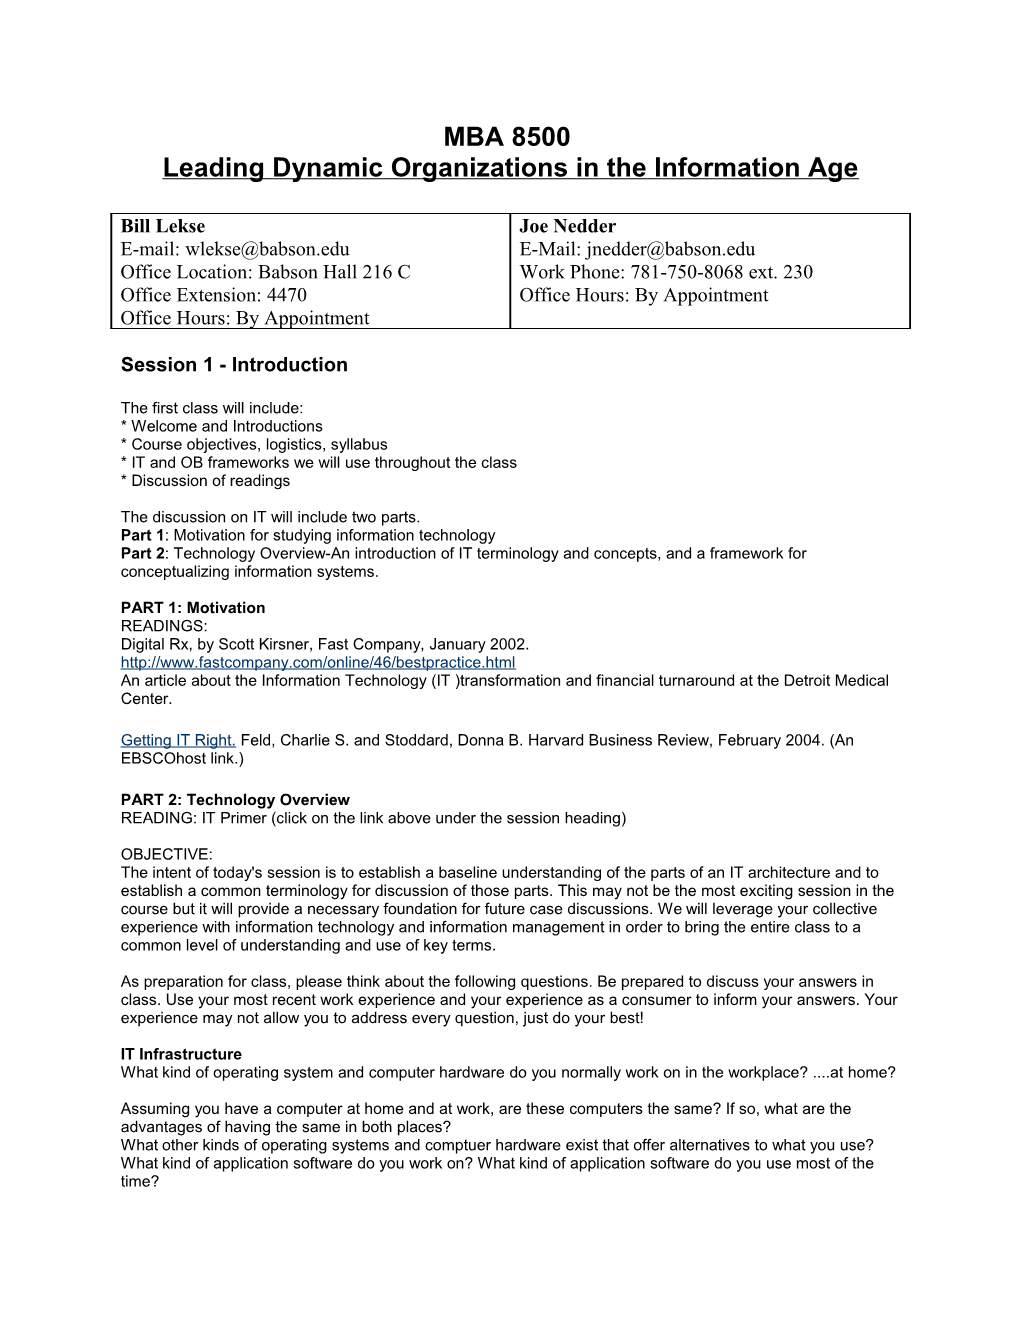 Leading Dynamic Organizations in the Information Age